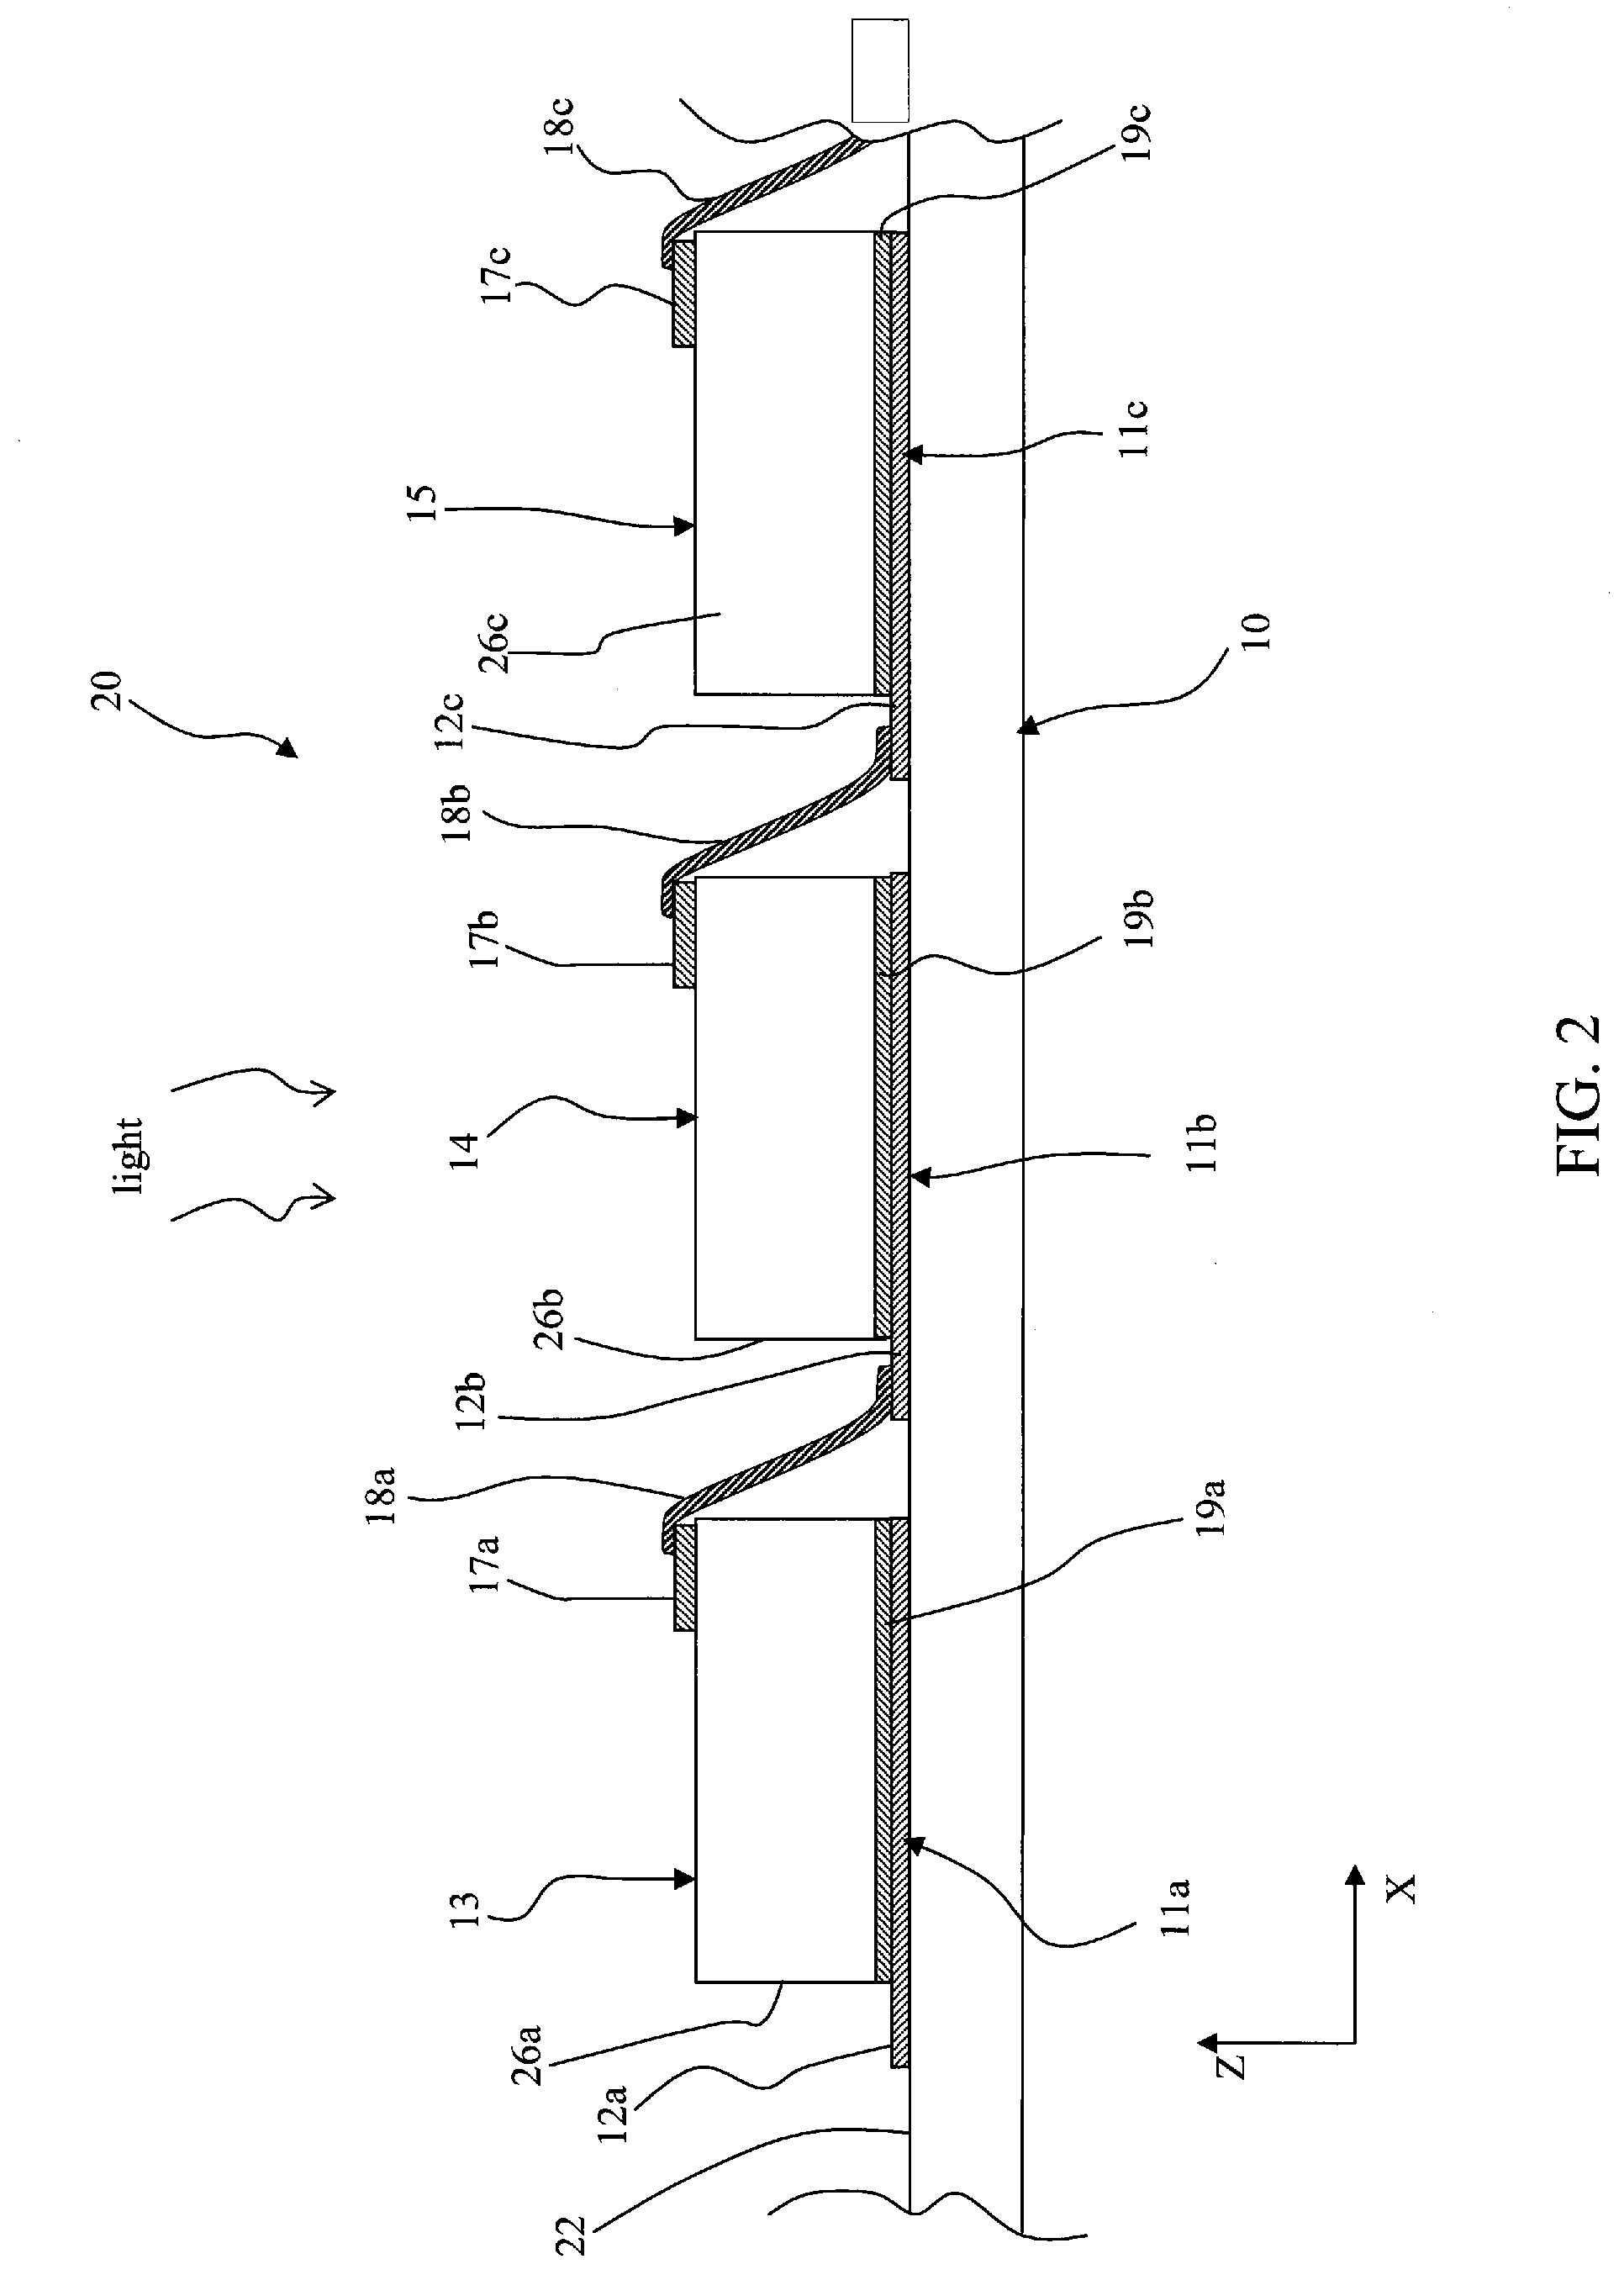 Solar Cell Interconnection on a Flexible Substrate